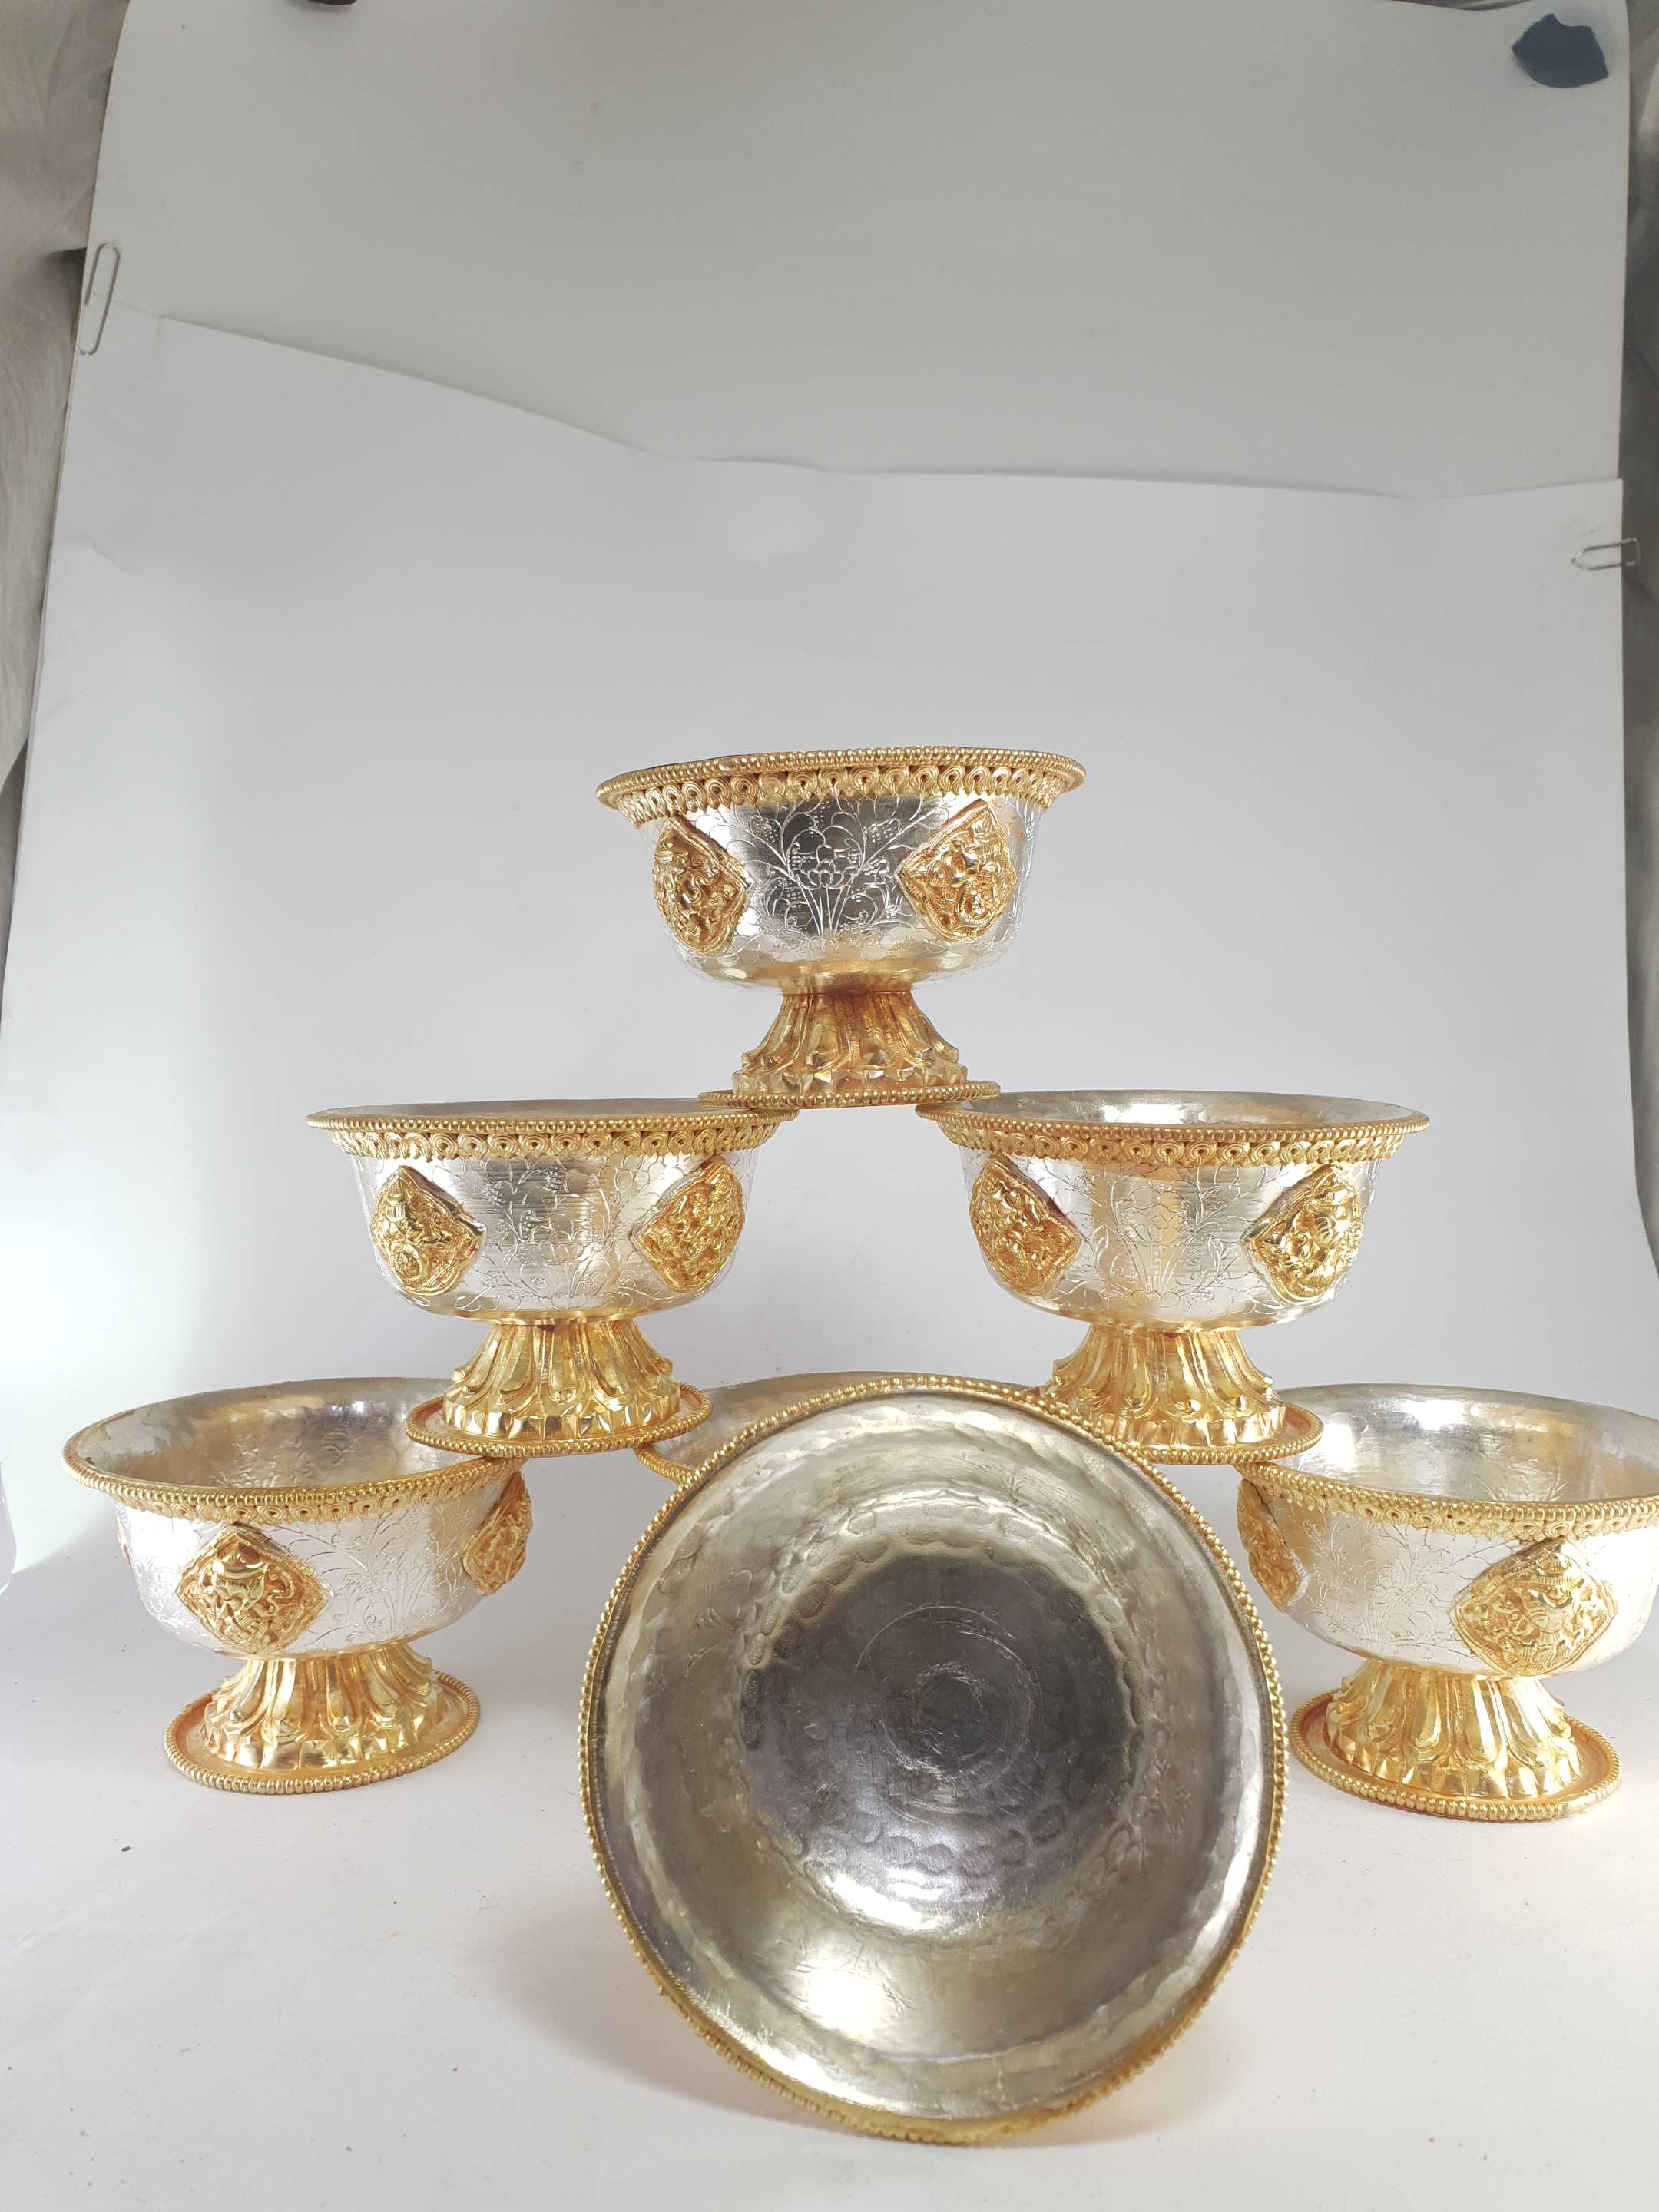 large Copper Offering Bowl With Stand And Hand Carving 7 Pcs Set, gold And Silver Plated